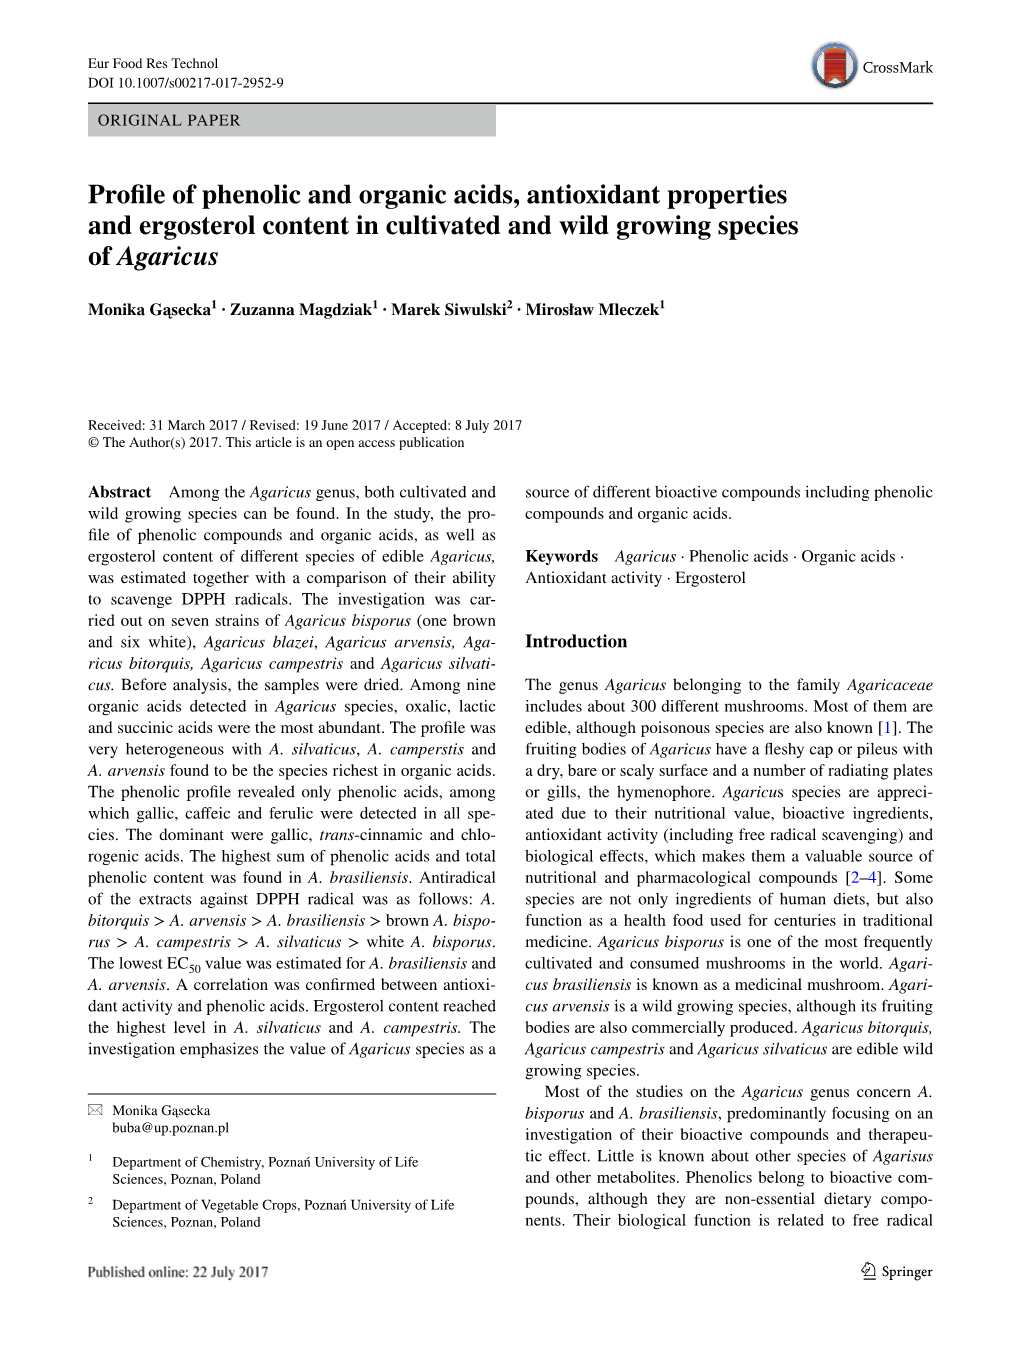 Profile of Phenolic and Organic Acids, Antioxidant Properties and Ergosterol Content in Cultivated and Wild Growing Species of A